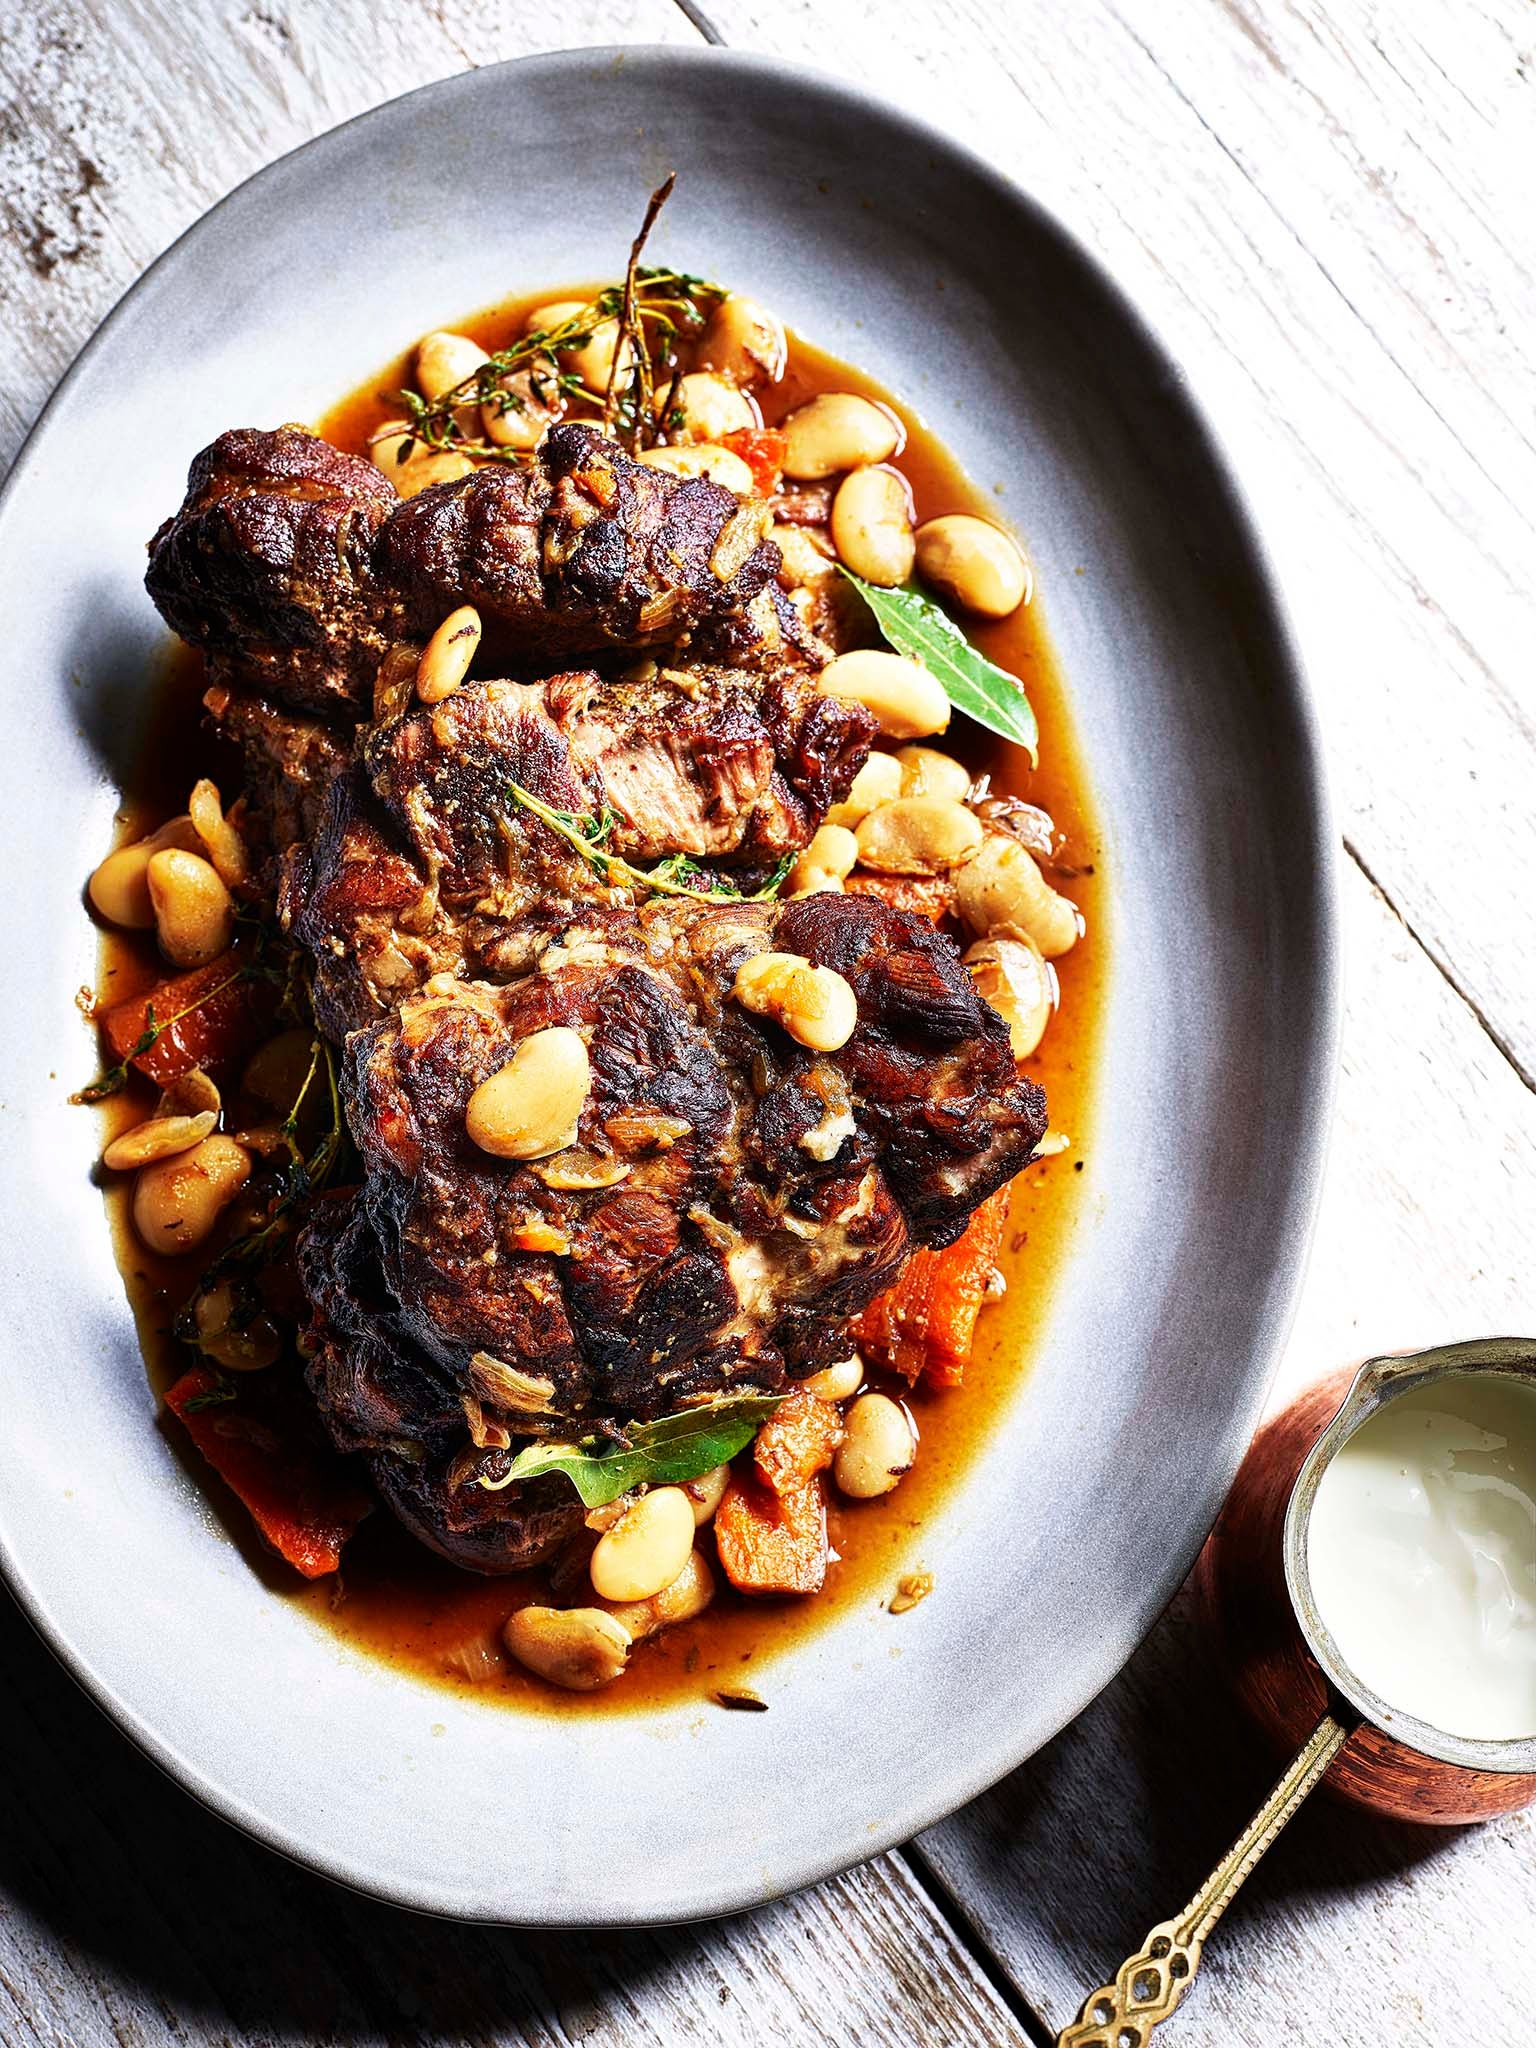 North African spicing works harmoniously with lamb